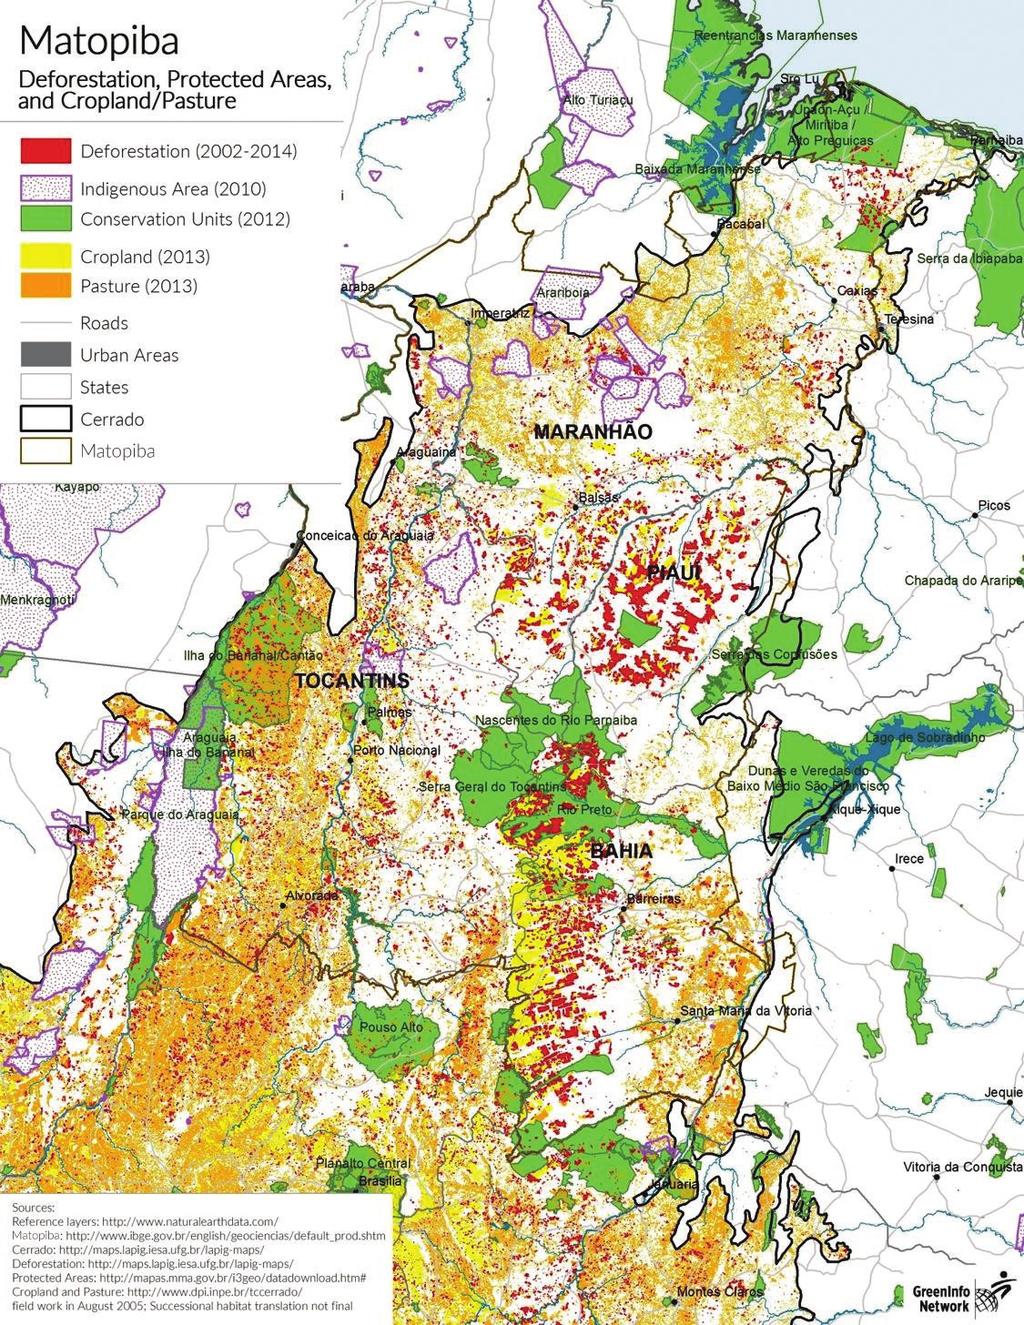 Matopiba Soy expansion has driven native vegetation conversion in Bahia and Piauí, hotspots for deforestation over the past decade.